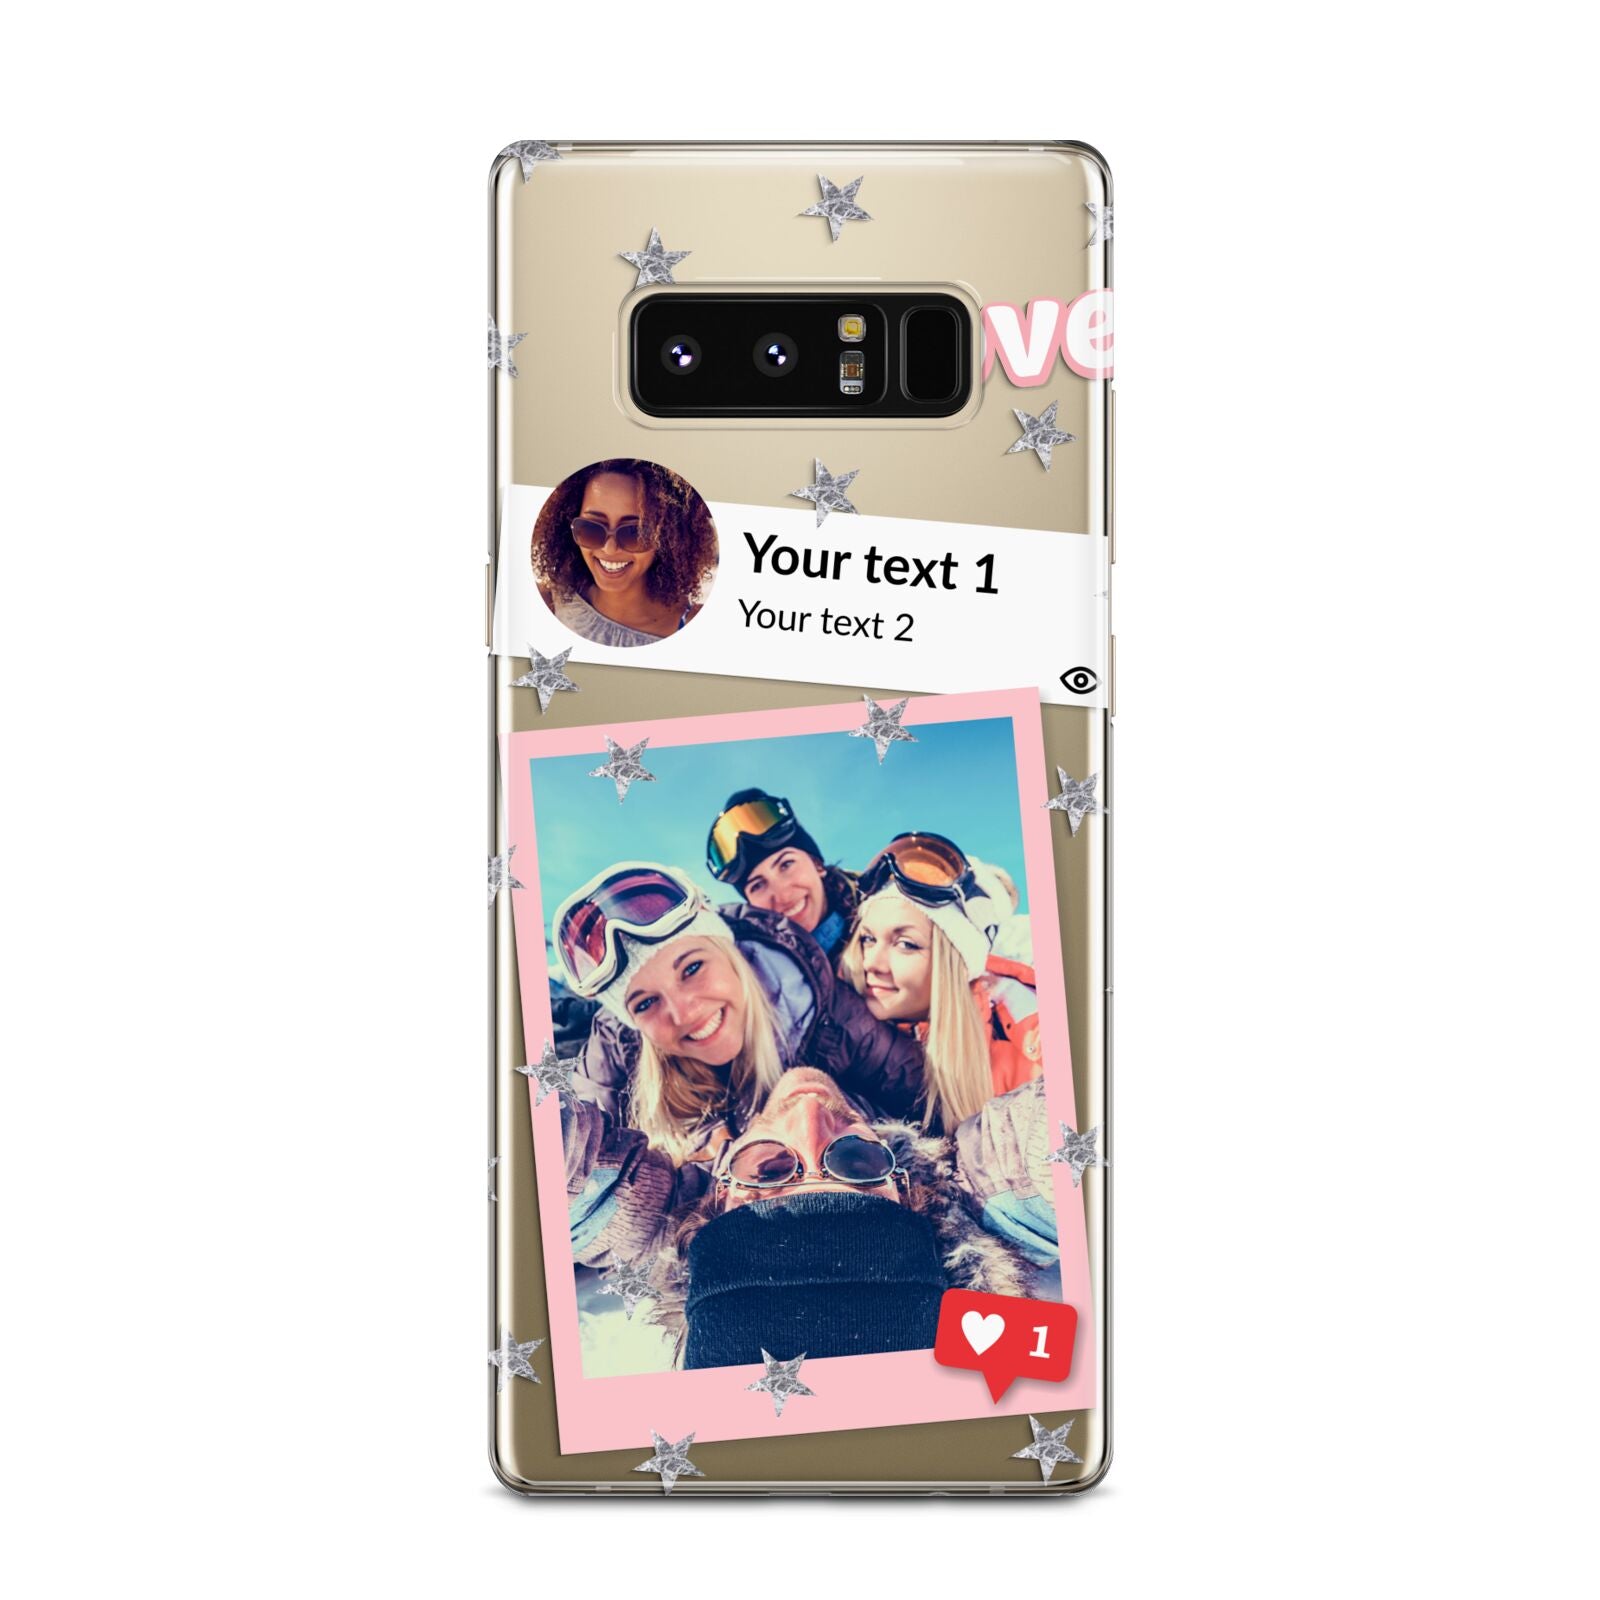 Starry Social Media Photo Montage Upload with Text Samsung Galaxy Note 8 Case